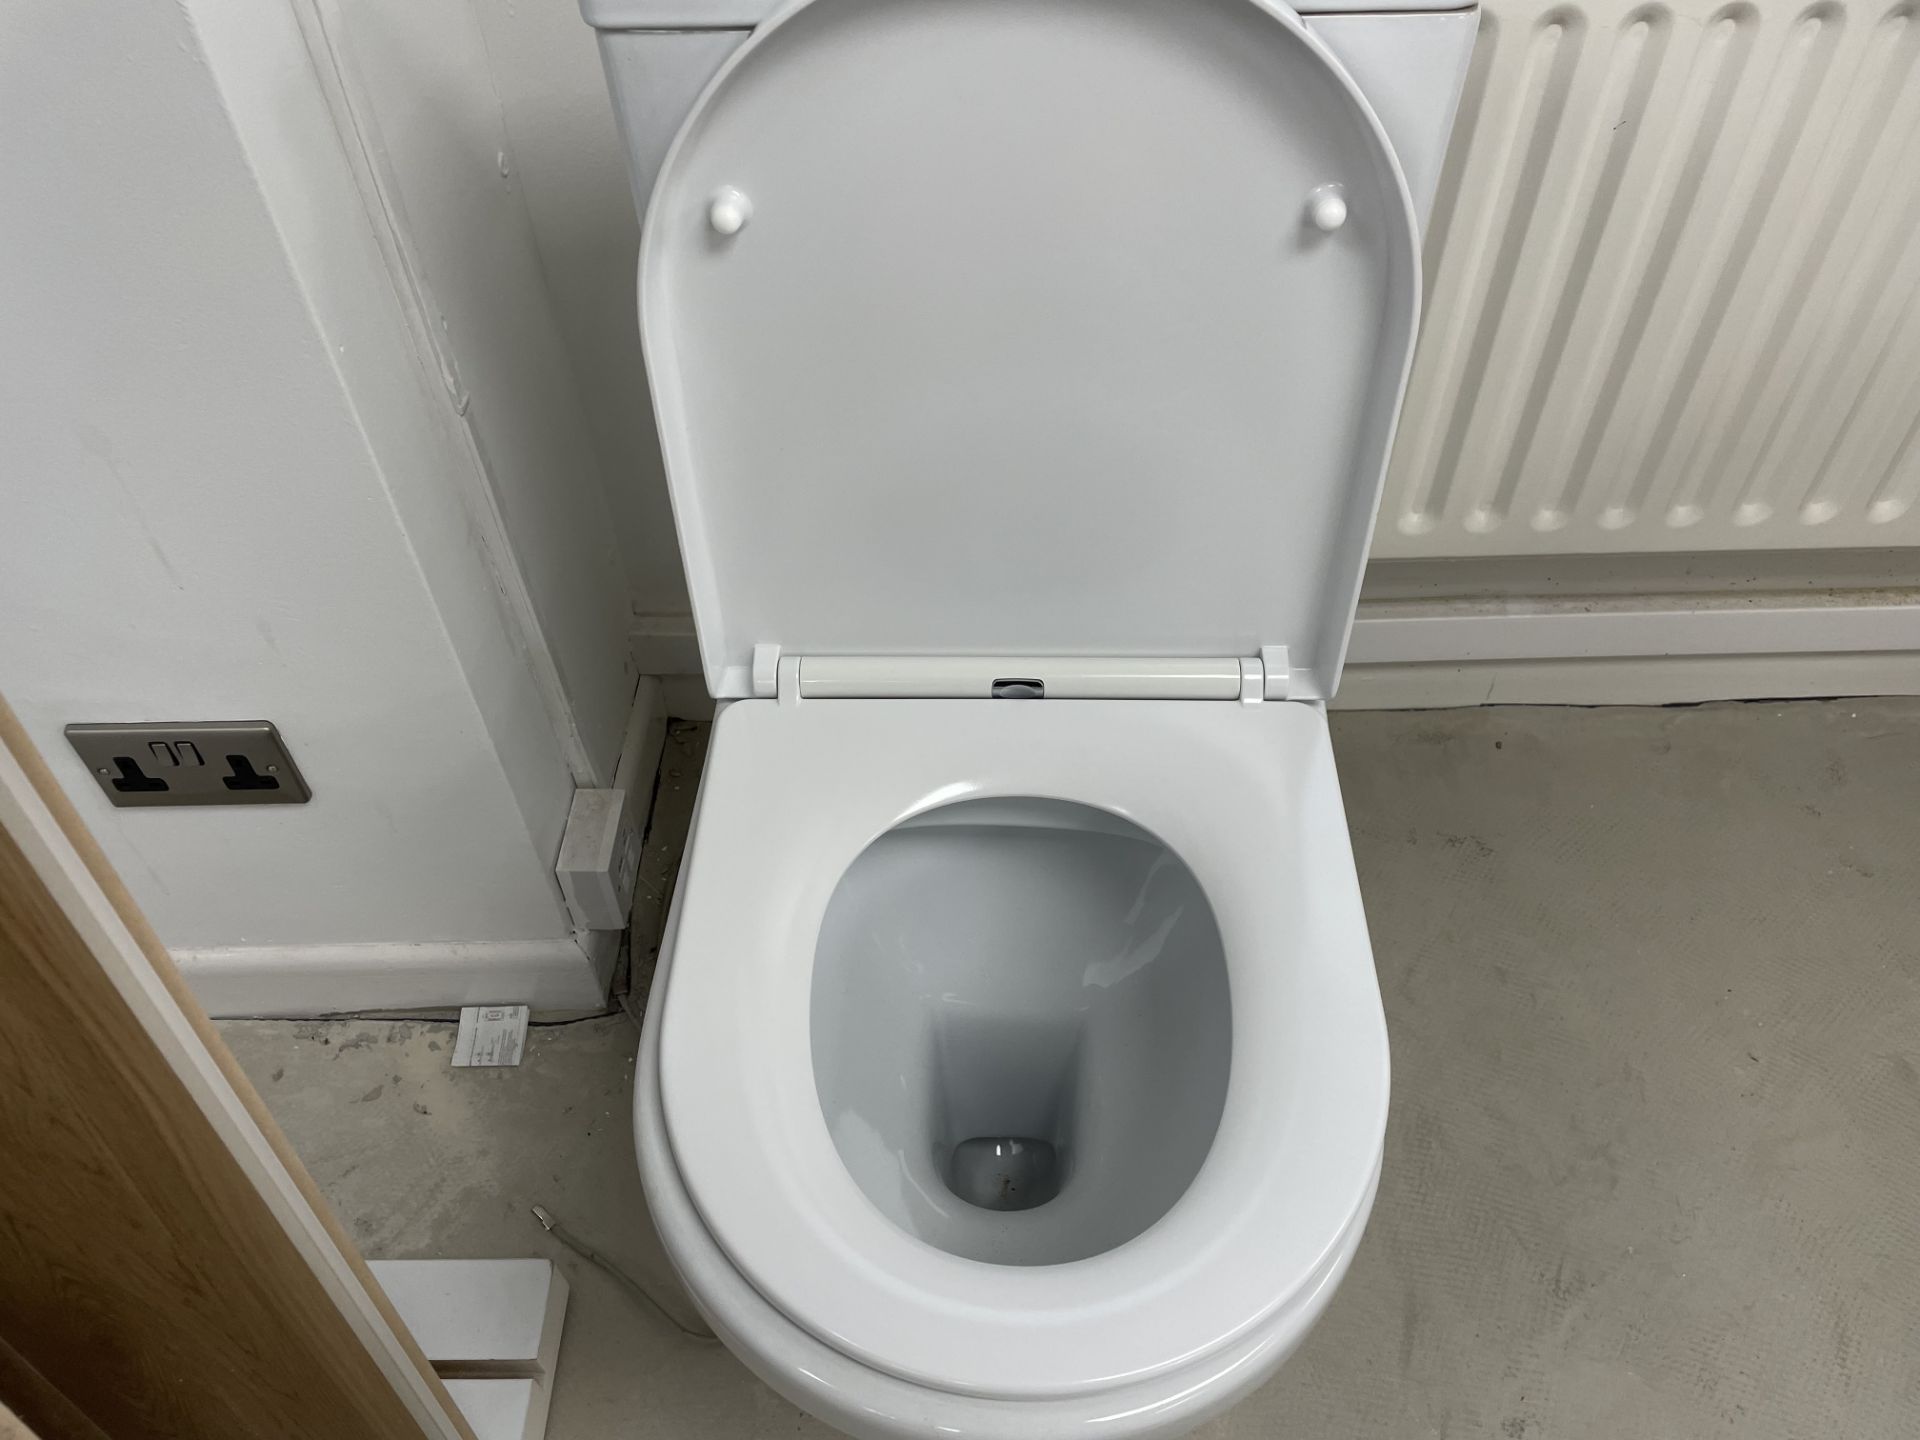 TOILET WITH SLOW CLOSE SEAT 400 x 600 - Image 5 of 5